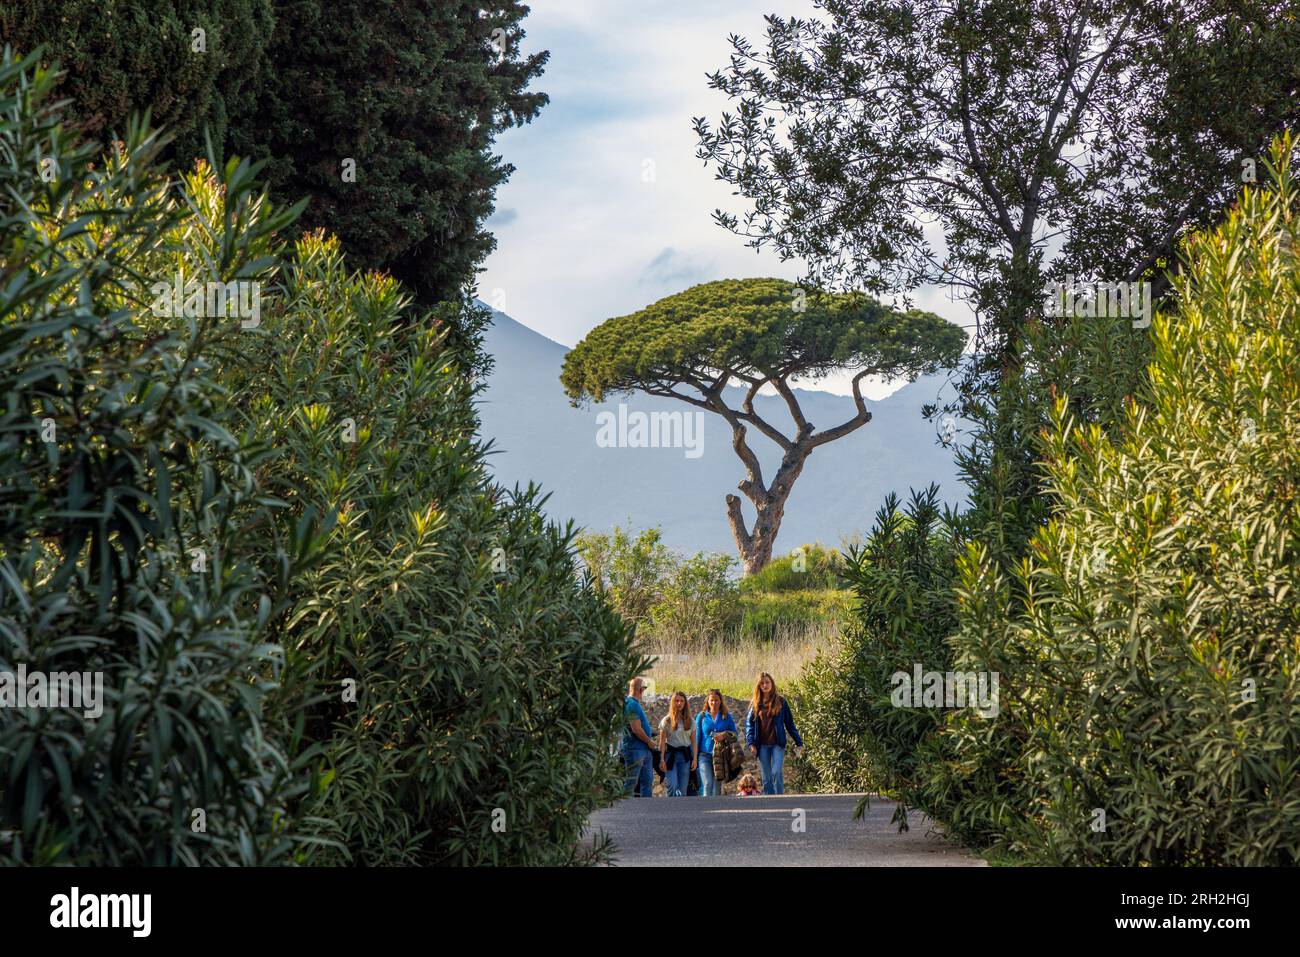 Pompeii Archaeological Site, Campania, Italy.  Visitors strolling through the ruins.  Pompeii, Herculaneum, and Torre Annunziata are collectively desi Stock Photo